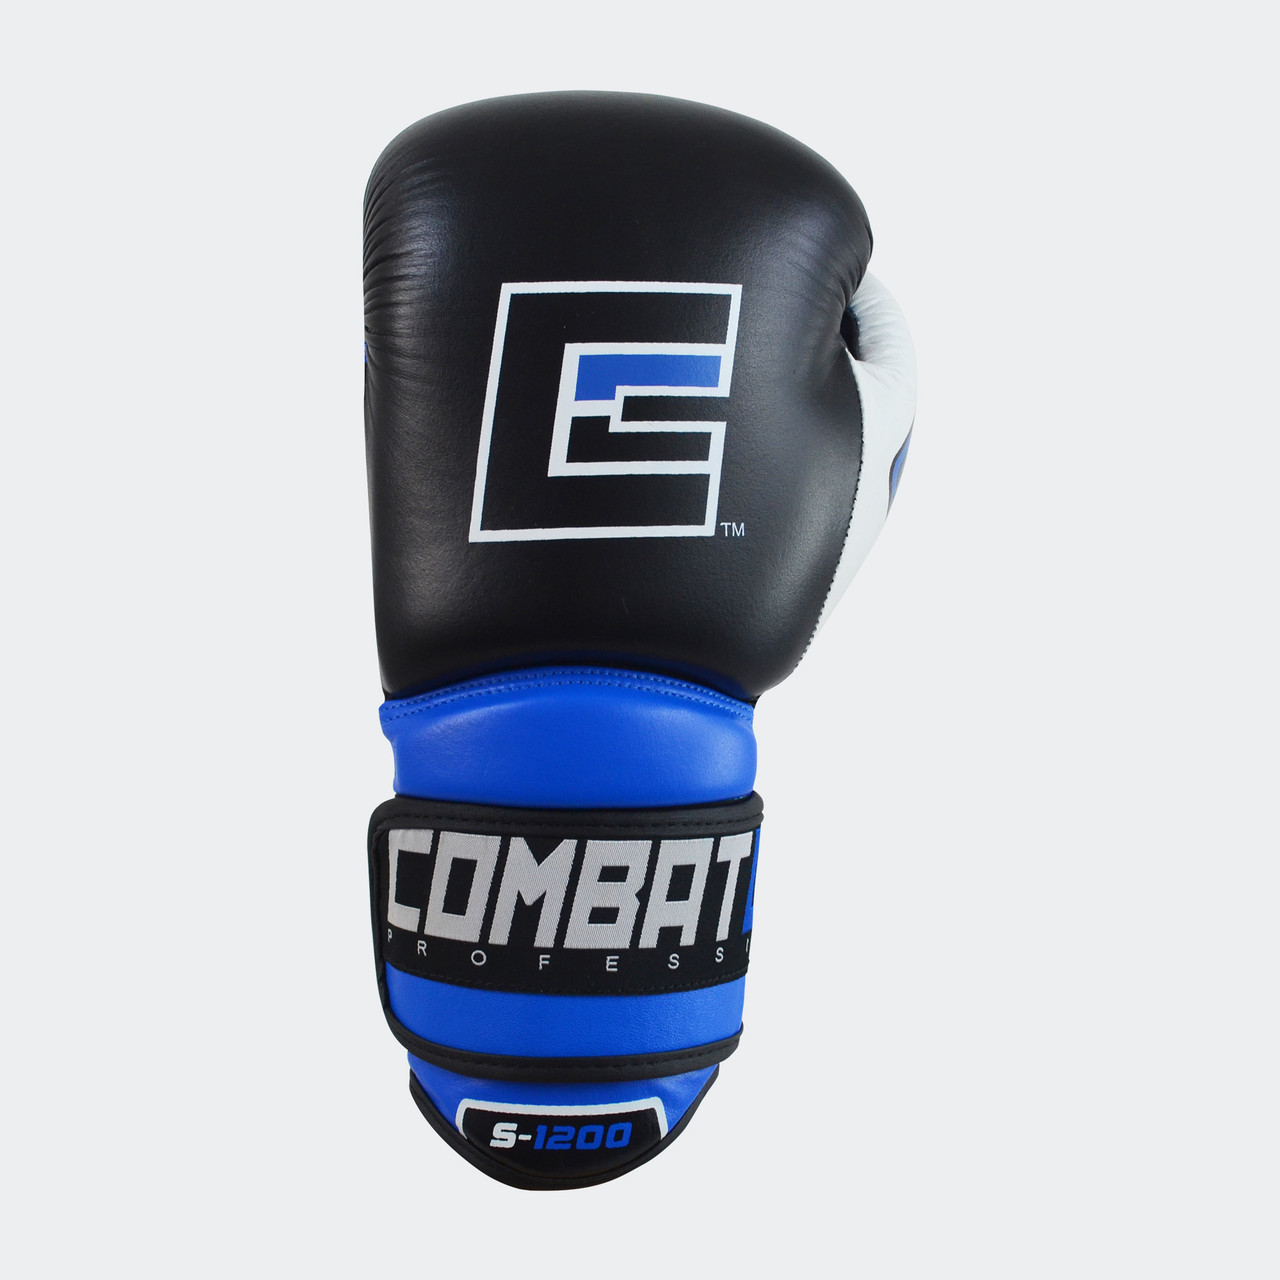 Supreme Boxing Gloves (Set of 3) – On The Arm